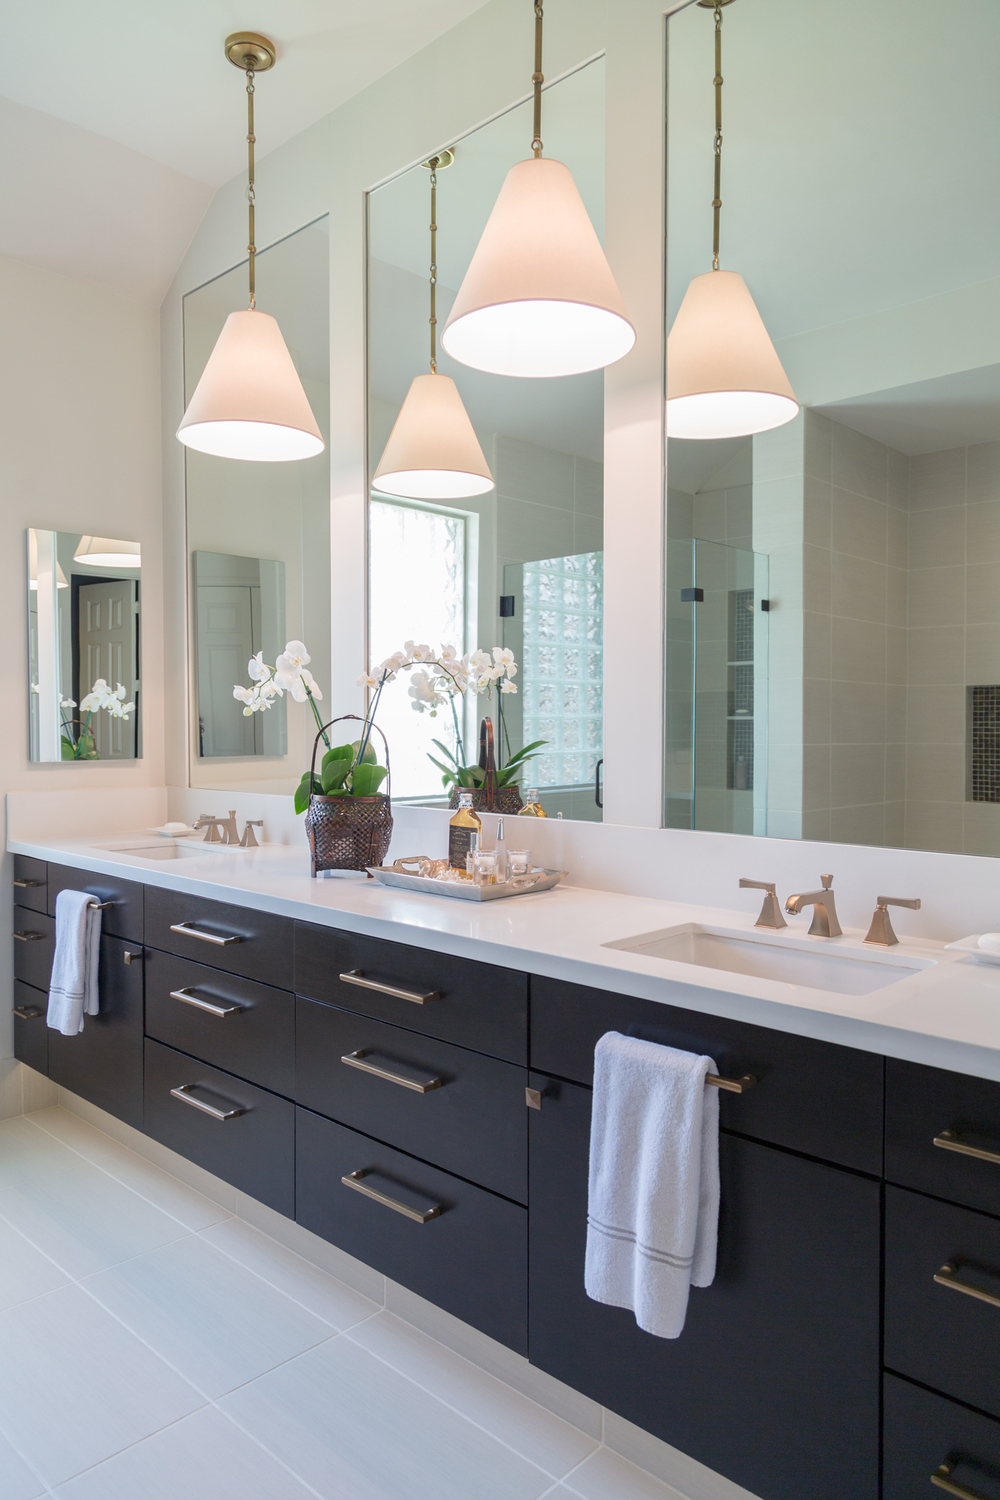 BEFORE & AFTER: A Master Bathroom Remodel Surprises Everyone With Unexpected Results — DESIGNED